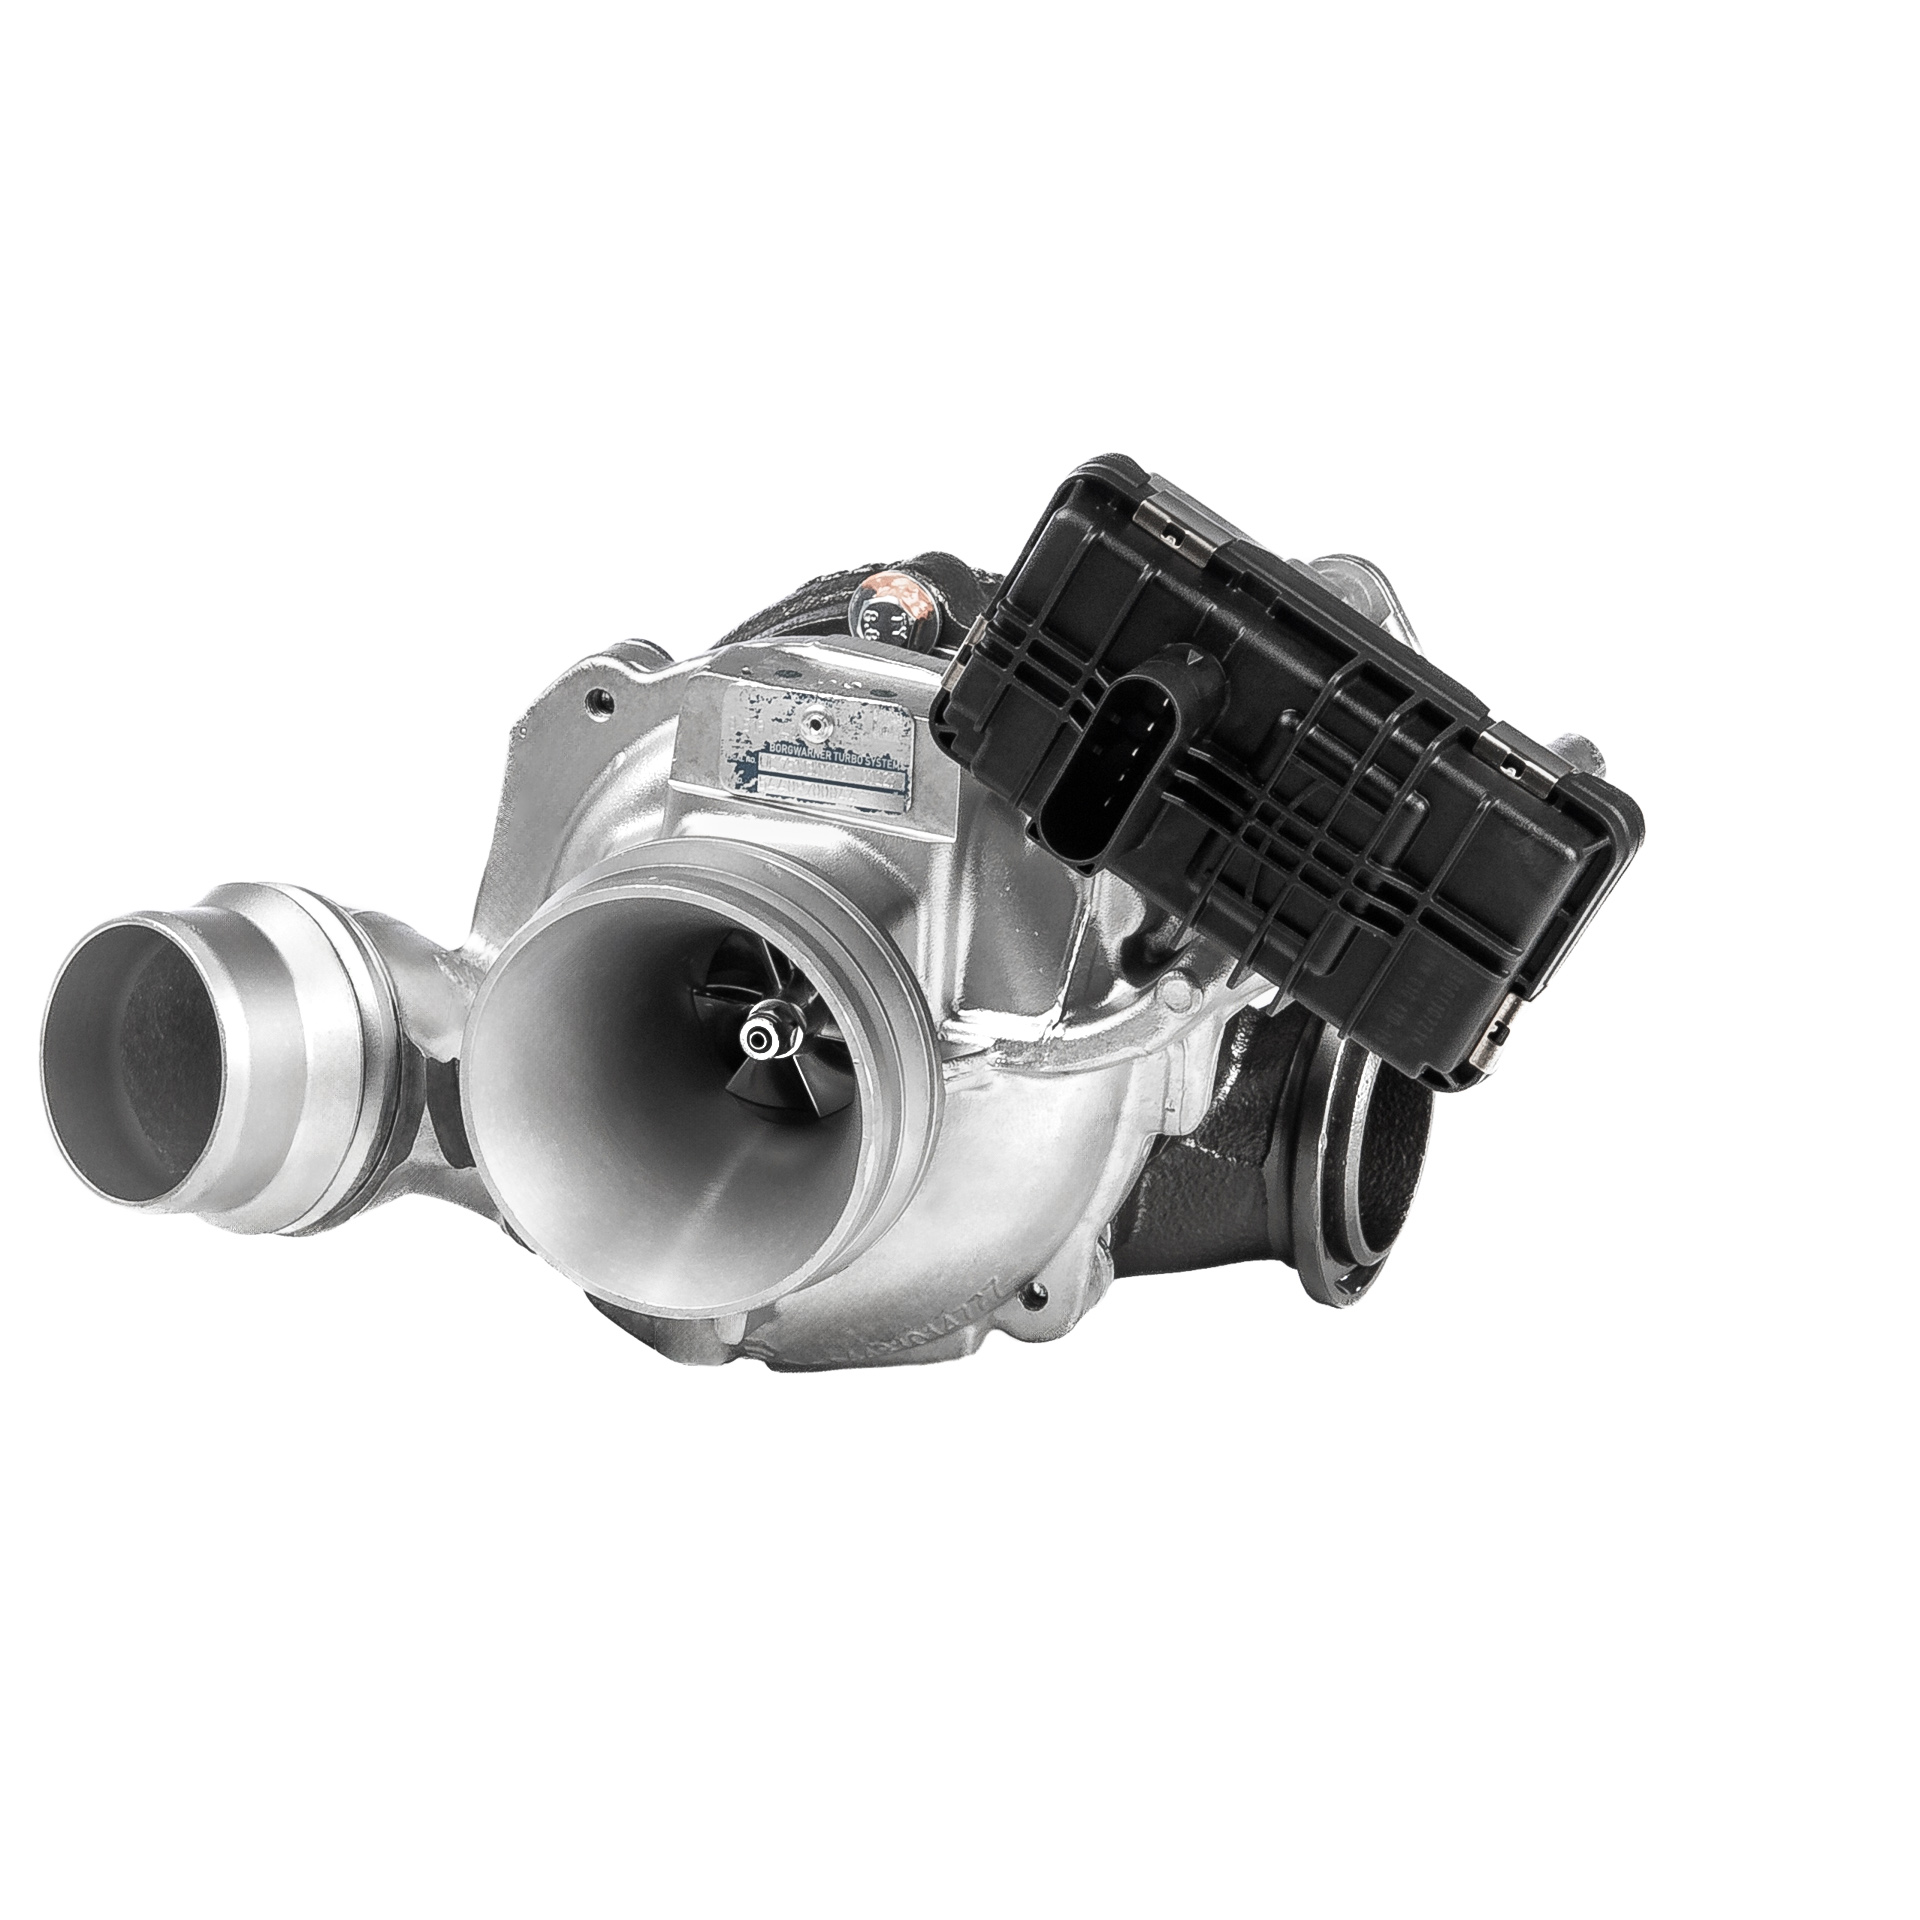 BMW 1 Series Turbocharger 16875606 BR Turbo 54409880044RS online buy